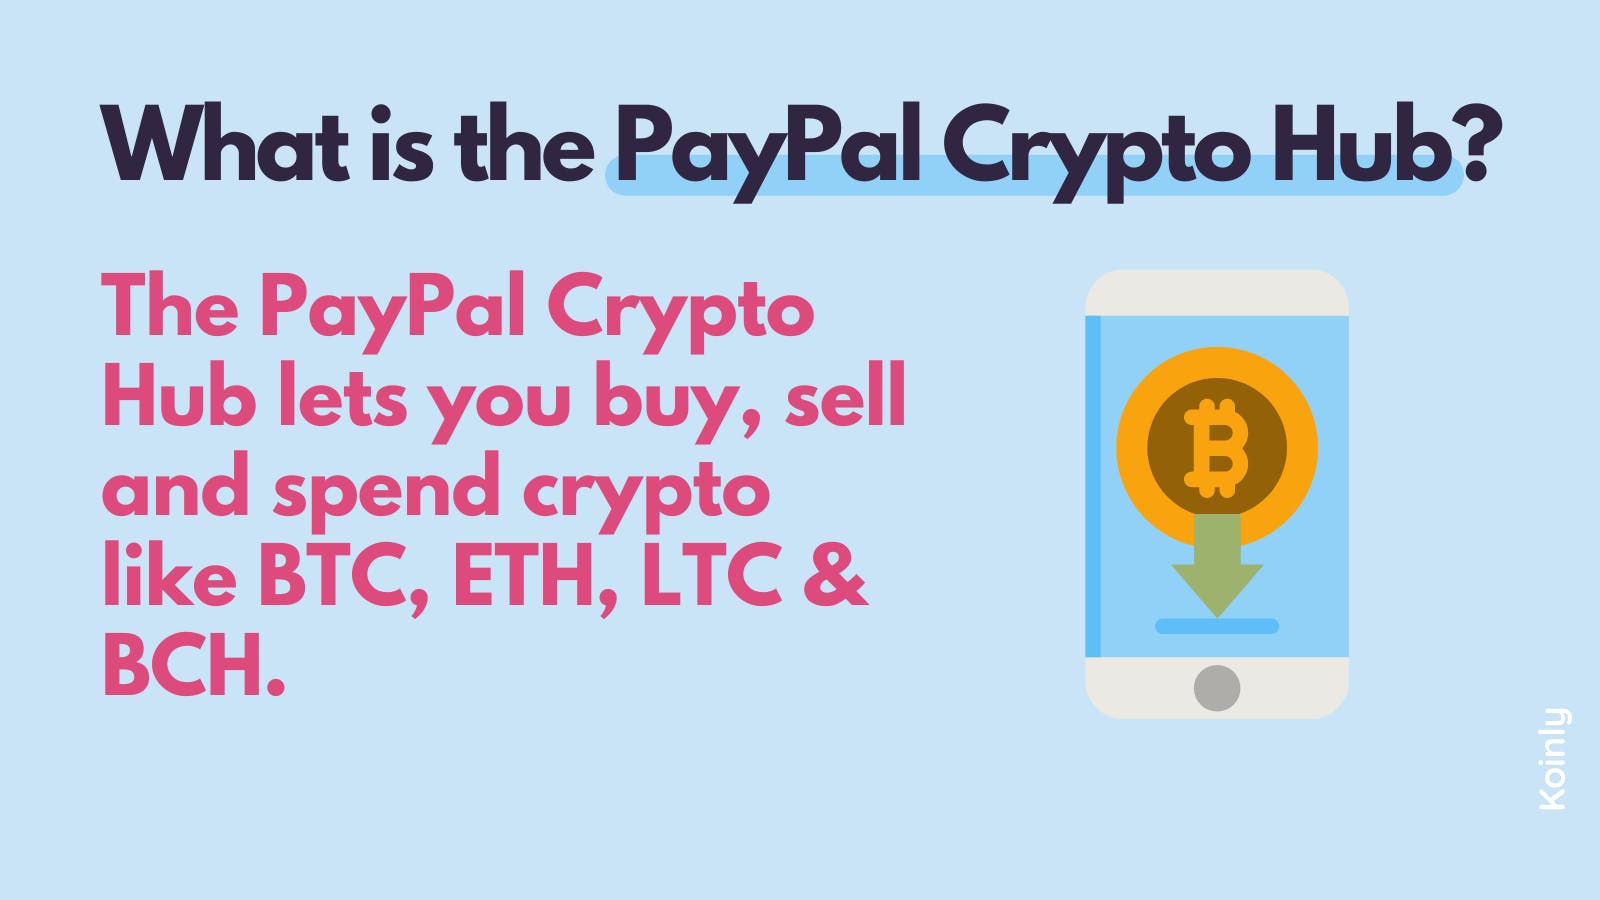 paypal fees for buying crypto